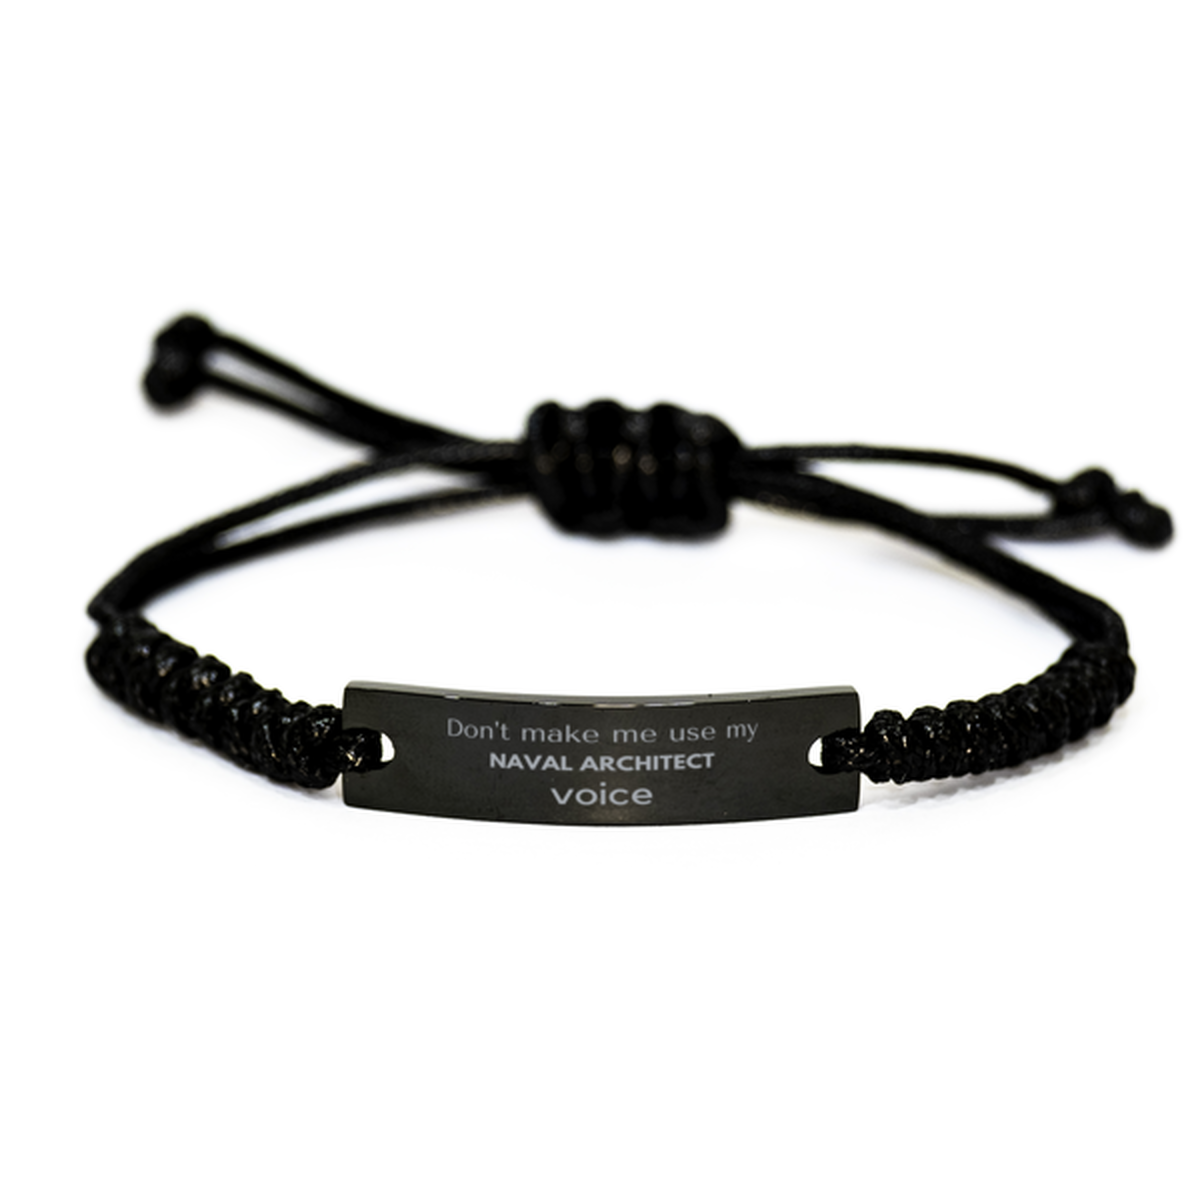 Don't make me use my Naval Architect voice, Sarcasm Naval Architect Gifts, Christmas Naval Architect Black Rope Bracelet Birthday Unique Gifts For Naval Architect Coworkers, Men, Women, Colleague, Friends